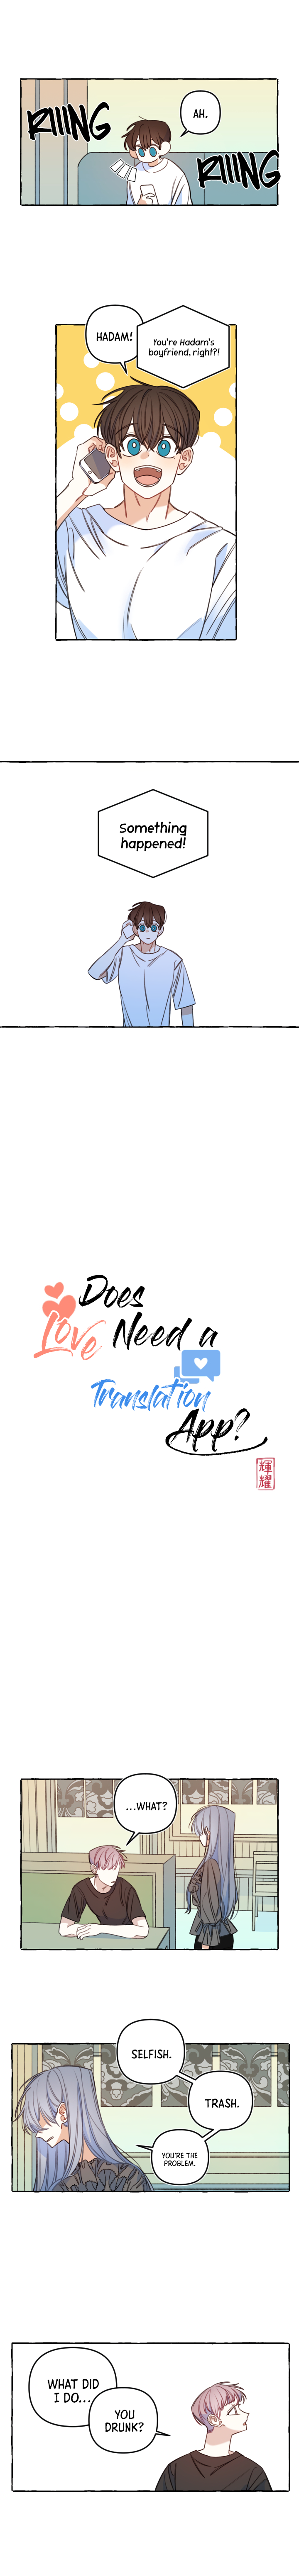 Does Love Need A Translation App? - Page 2